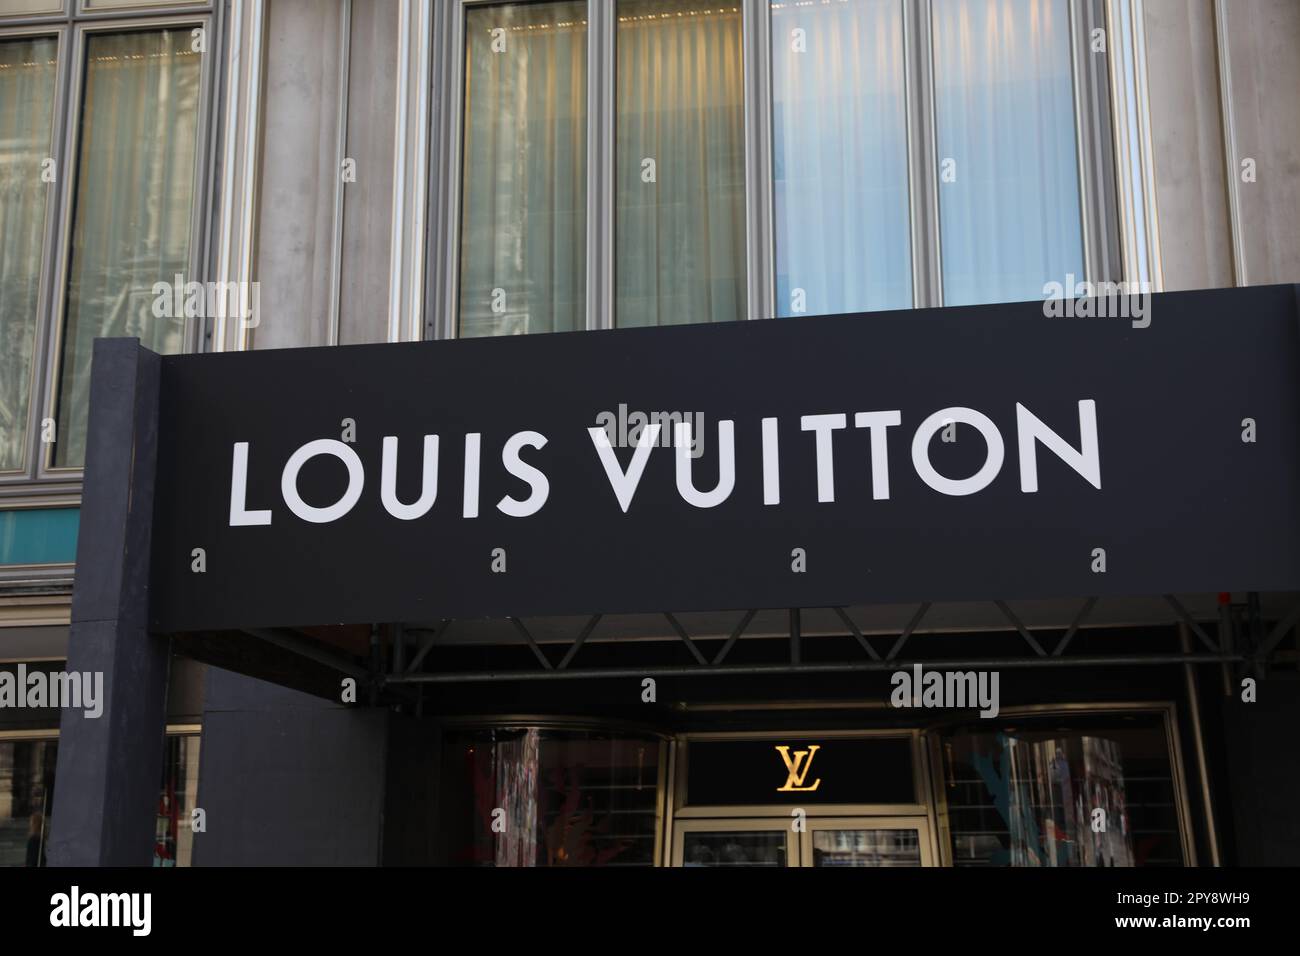 Louis Vuitton fashion store, Cologne, Germany Europe Stock Photo